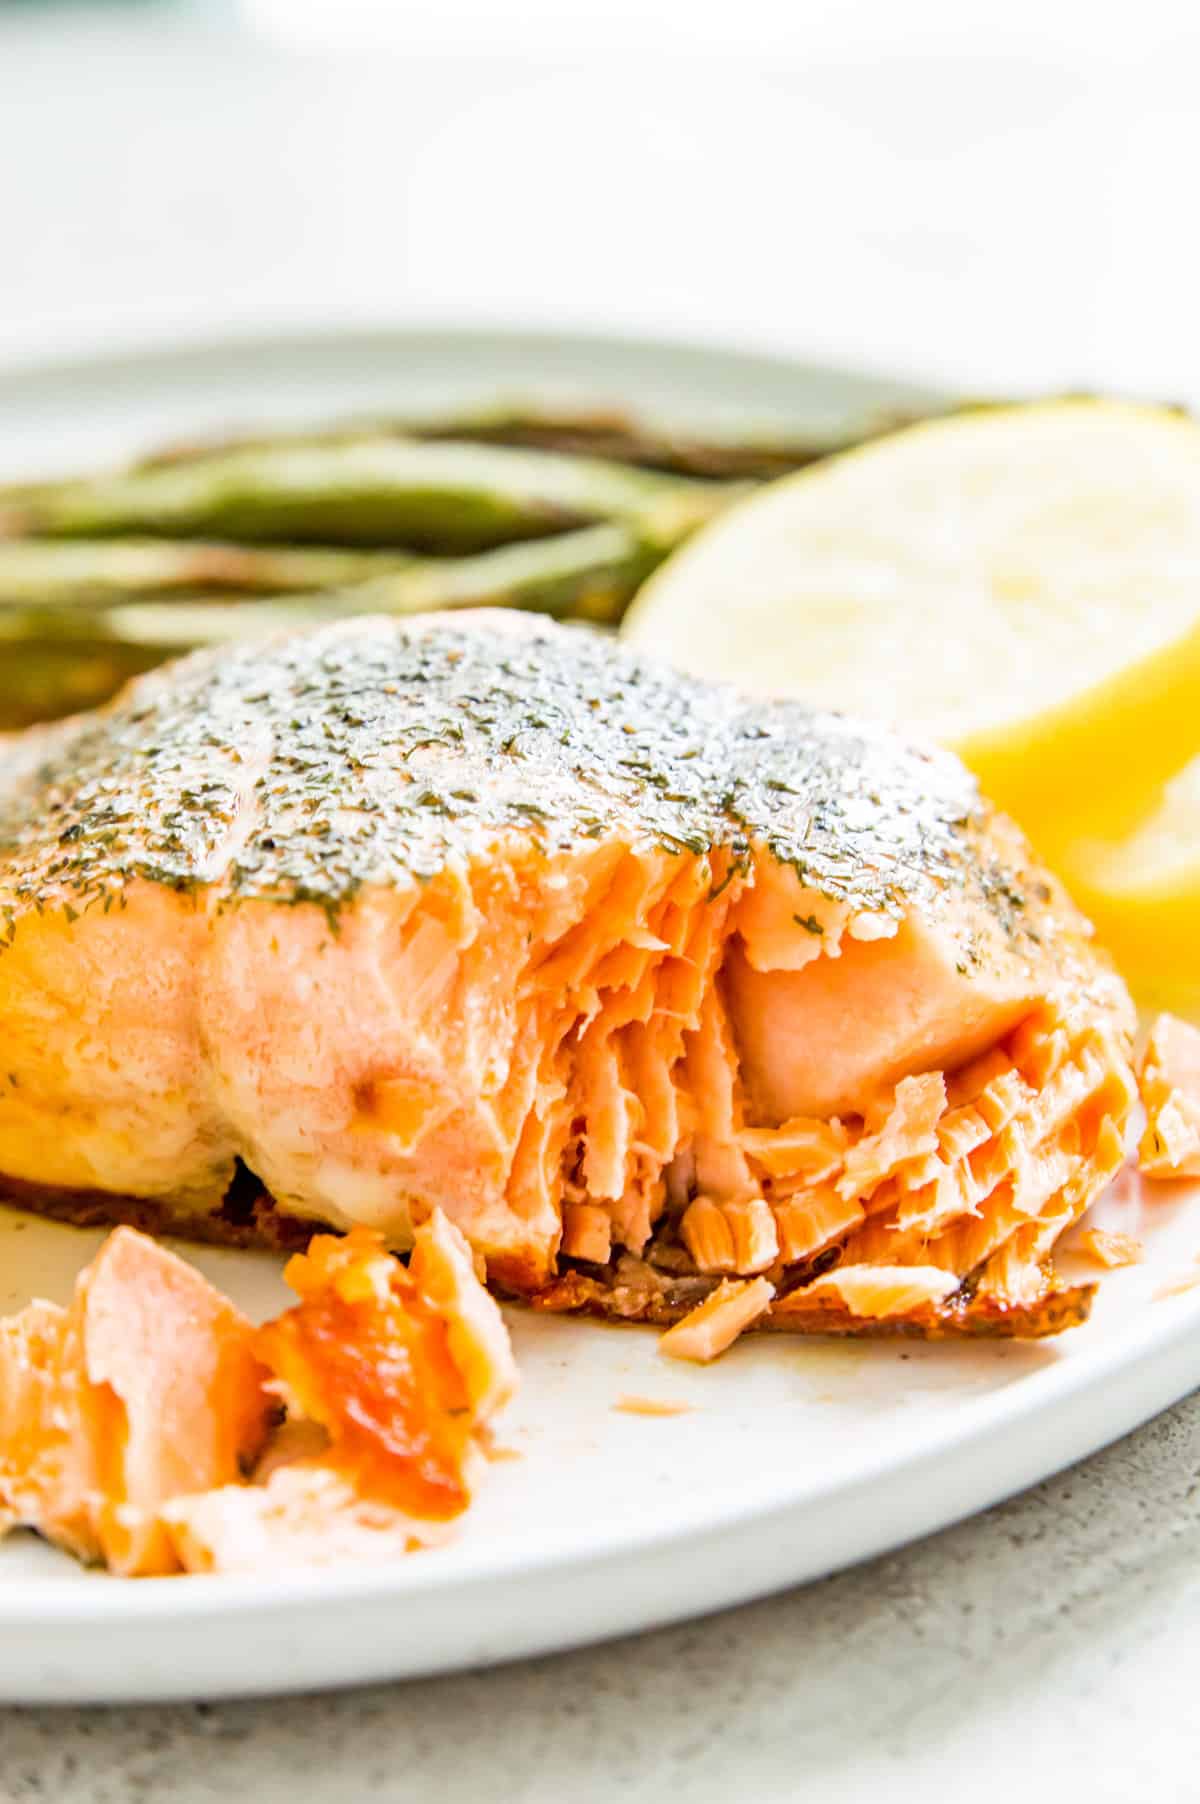 a piece of cooked salmon on a plate with asparagus